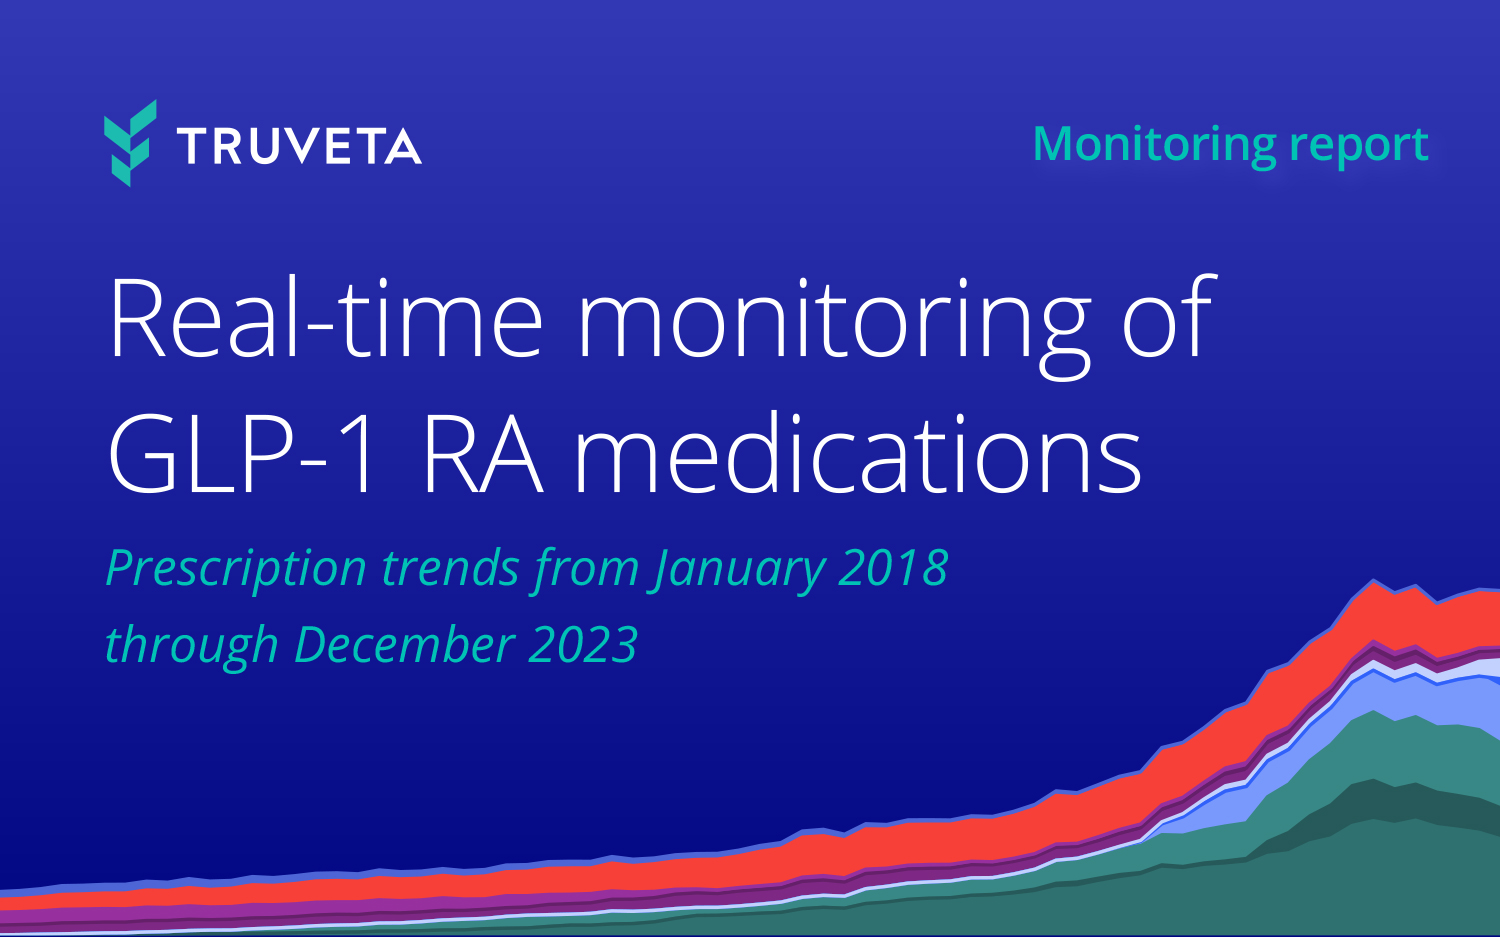 Real-time monitoring of GLP-1 RA medication prescribing trends, including Ozempic, Mounjaro, Wegovy, Zepbound, Trulicity, and more using EHR data